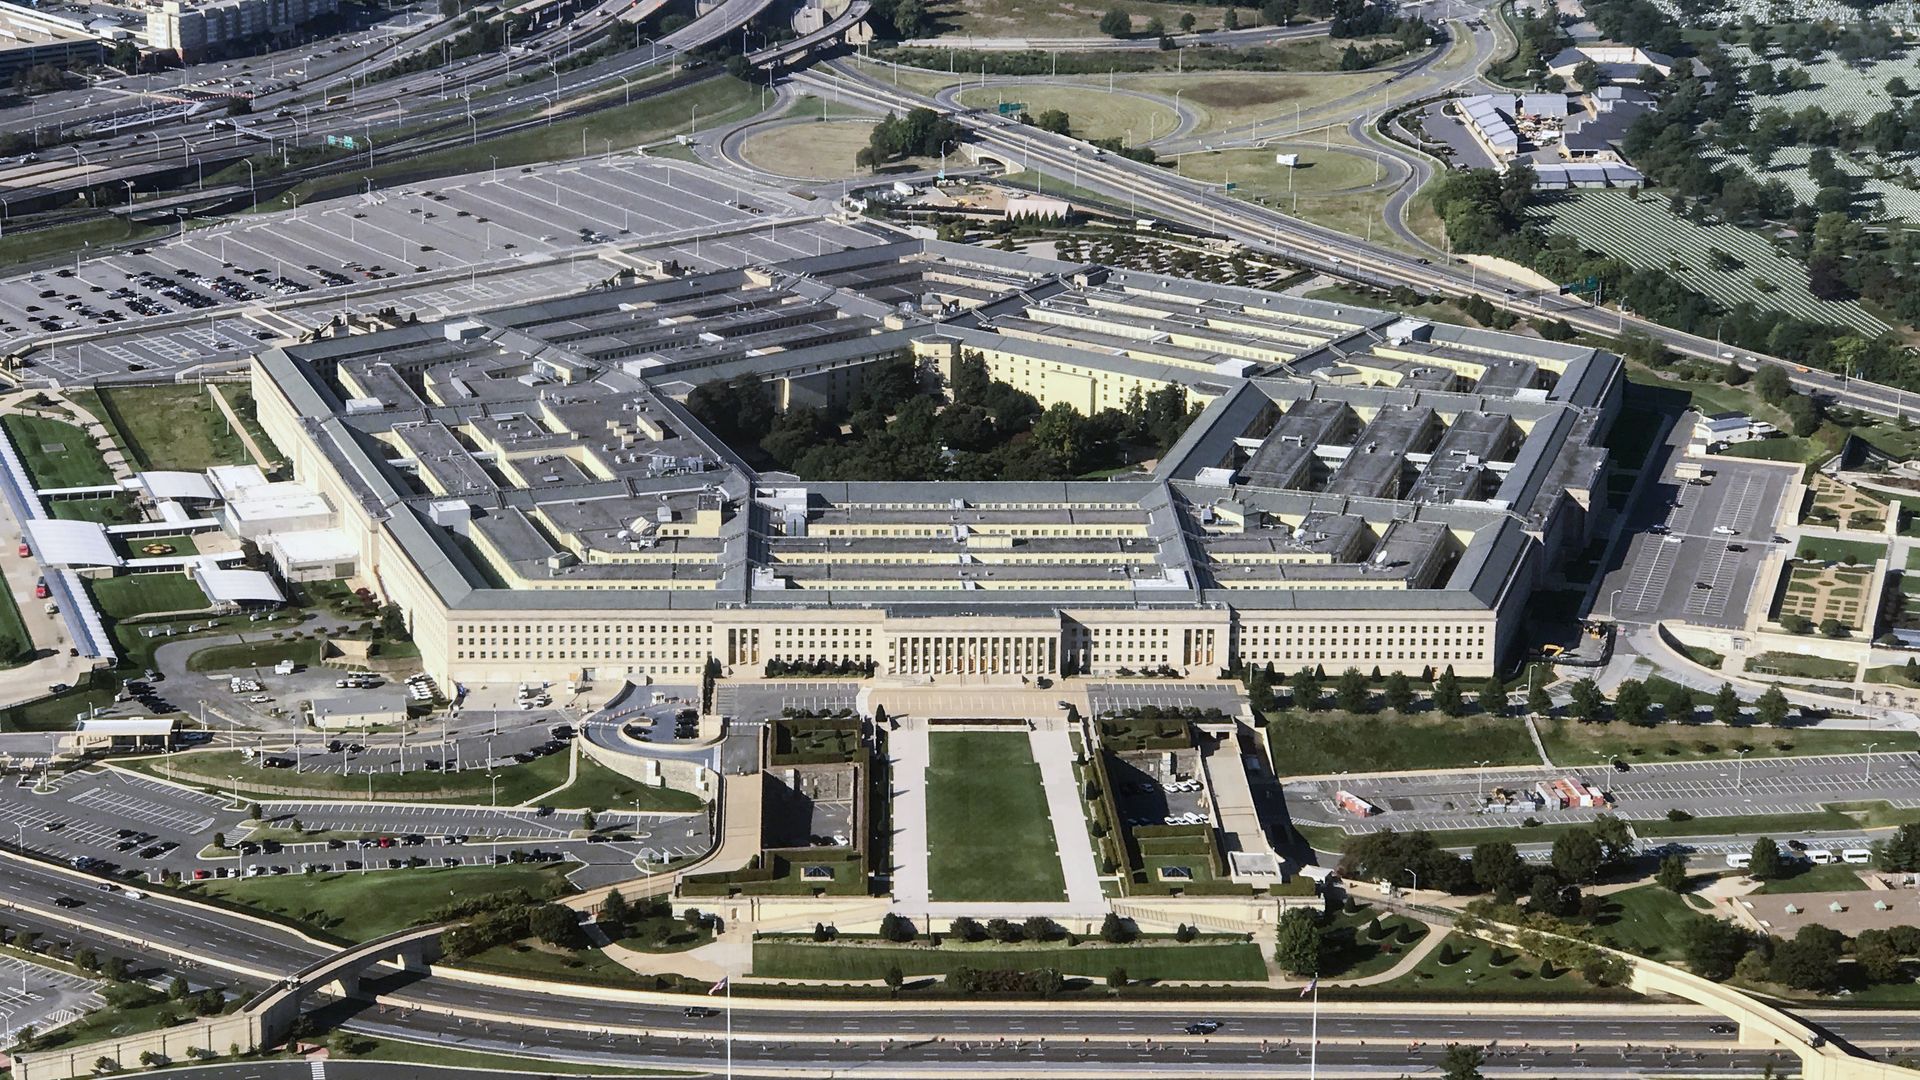 Aerial view of the pentagon building